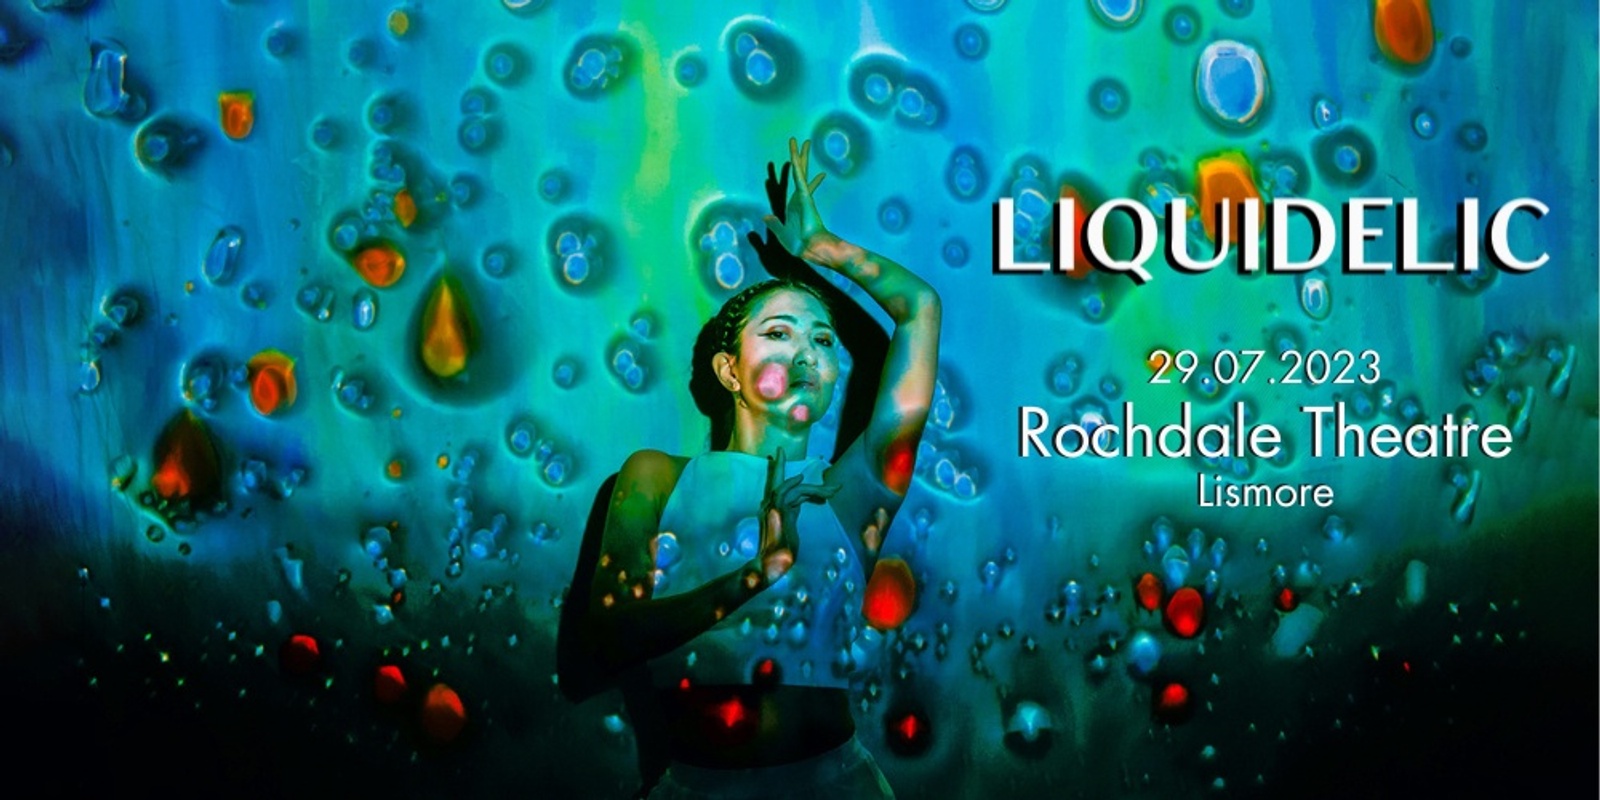 Banner image for Liquidelic at Rochdale Theatre Lismore